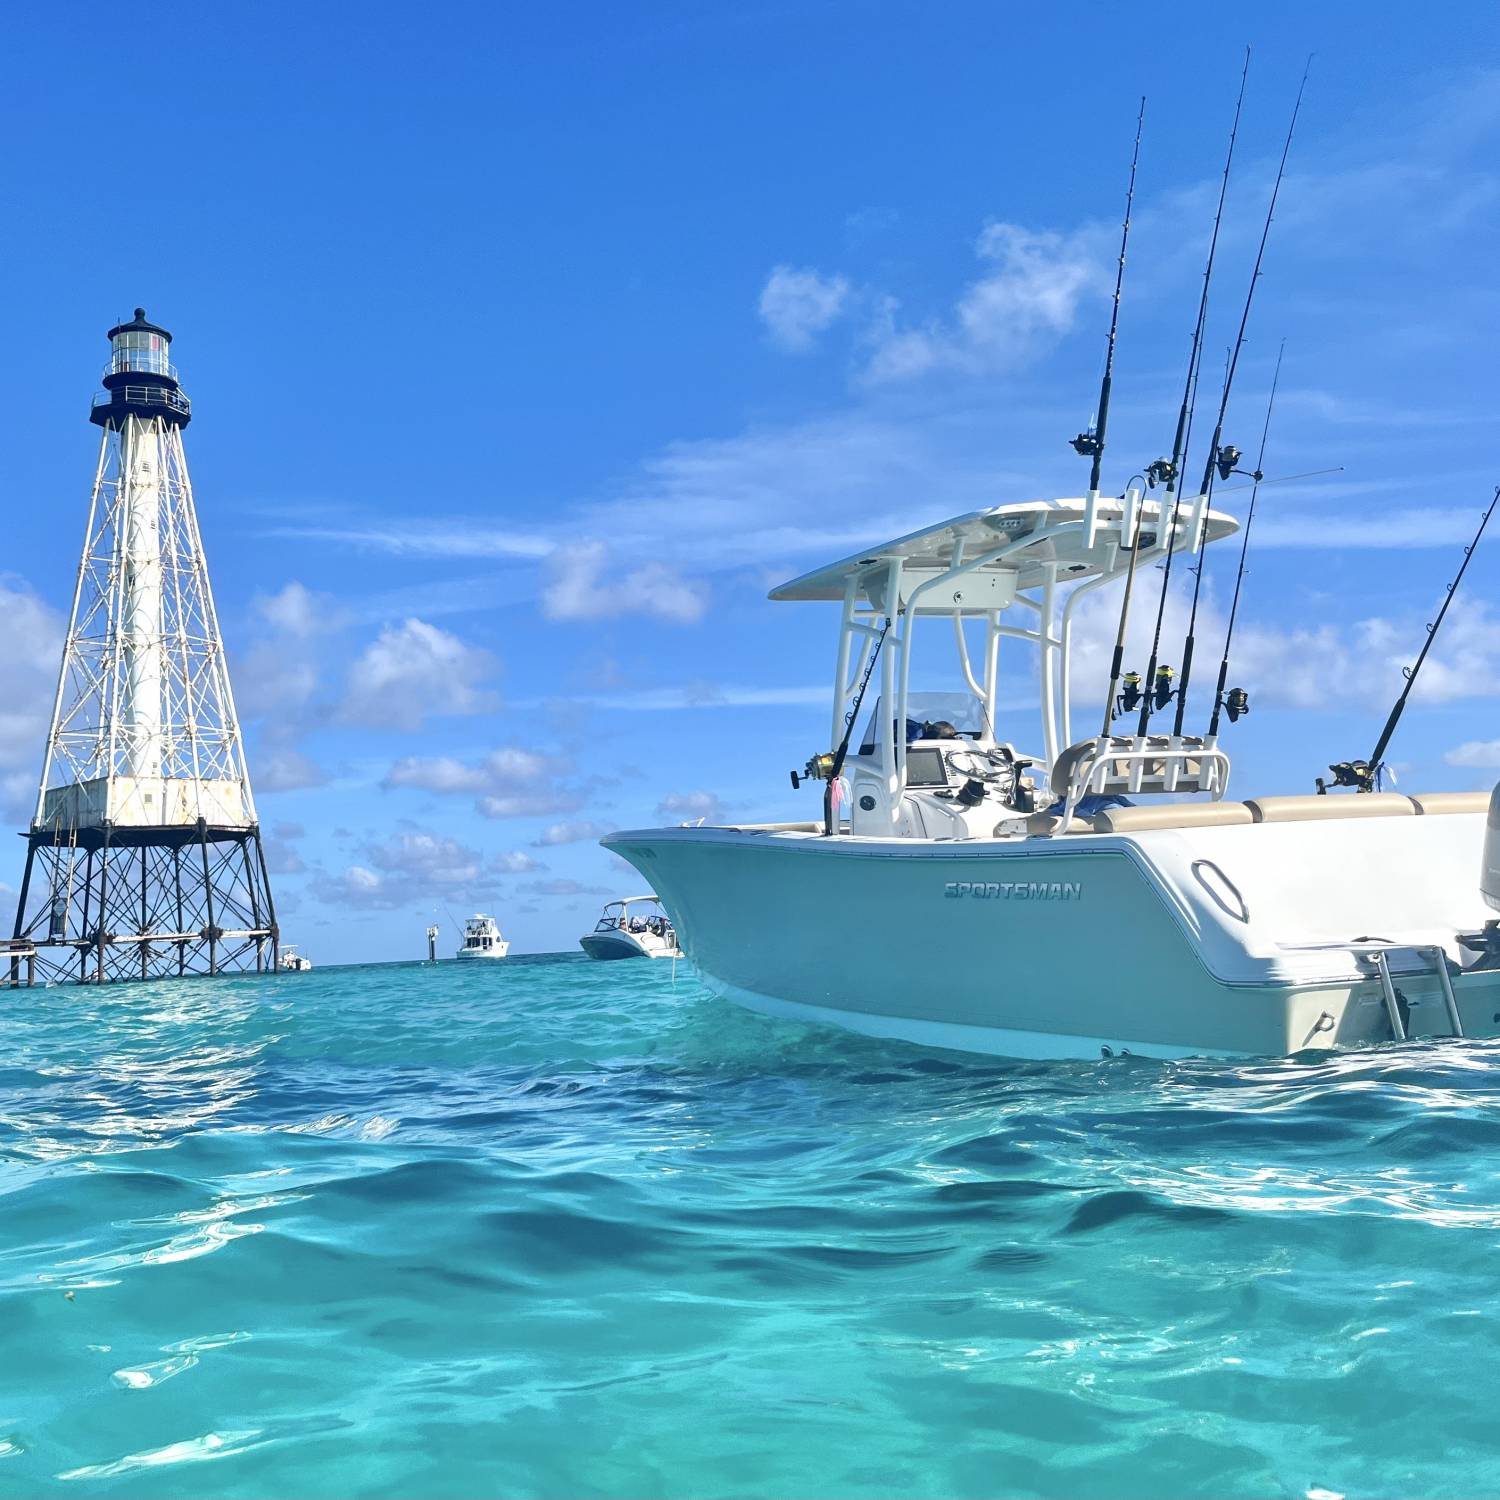 Title: Alligator Reef Lighthouse - On board their Sportsman Heritage 231 Center Console - Location: Islamorada, FL. Participating in the Photo Contest #SportsmanMarch2023